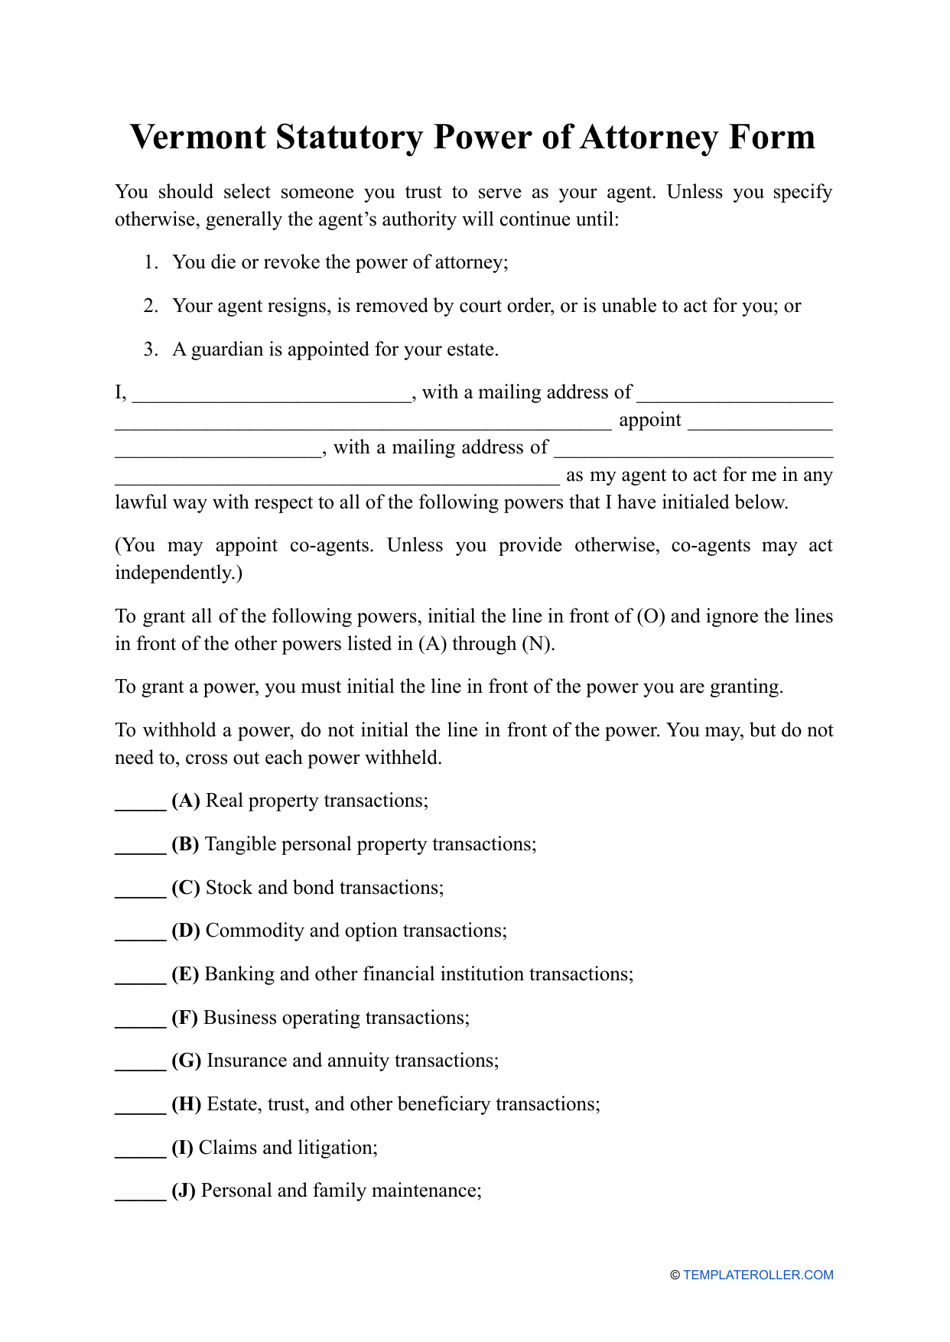 Statutory Power of Attorney Form - Vermont, Page 1